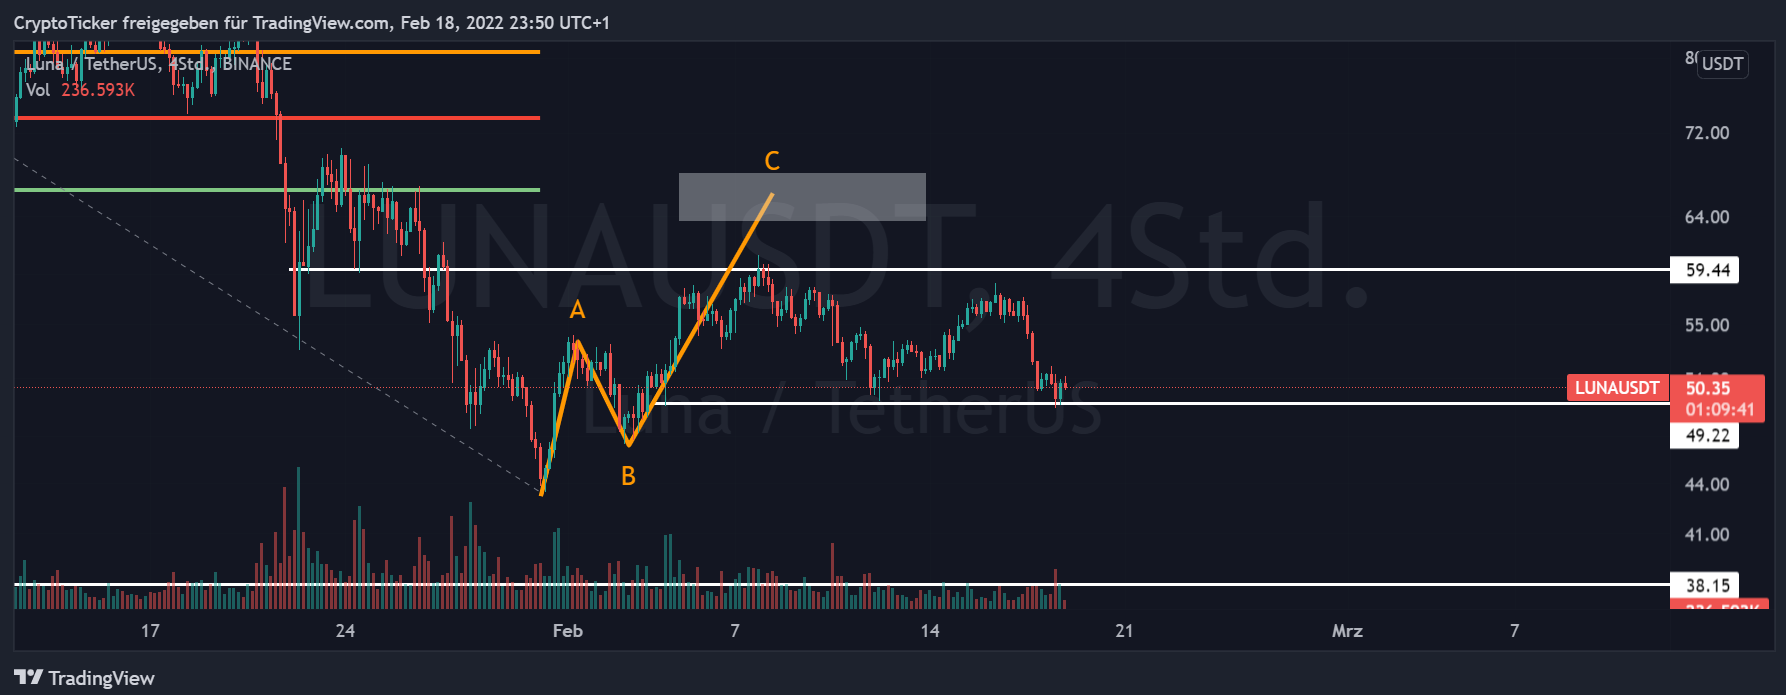 LUNA/USDT 4-hours chart showing the ABC sequence - Luna price prediction